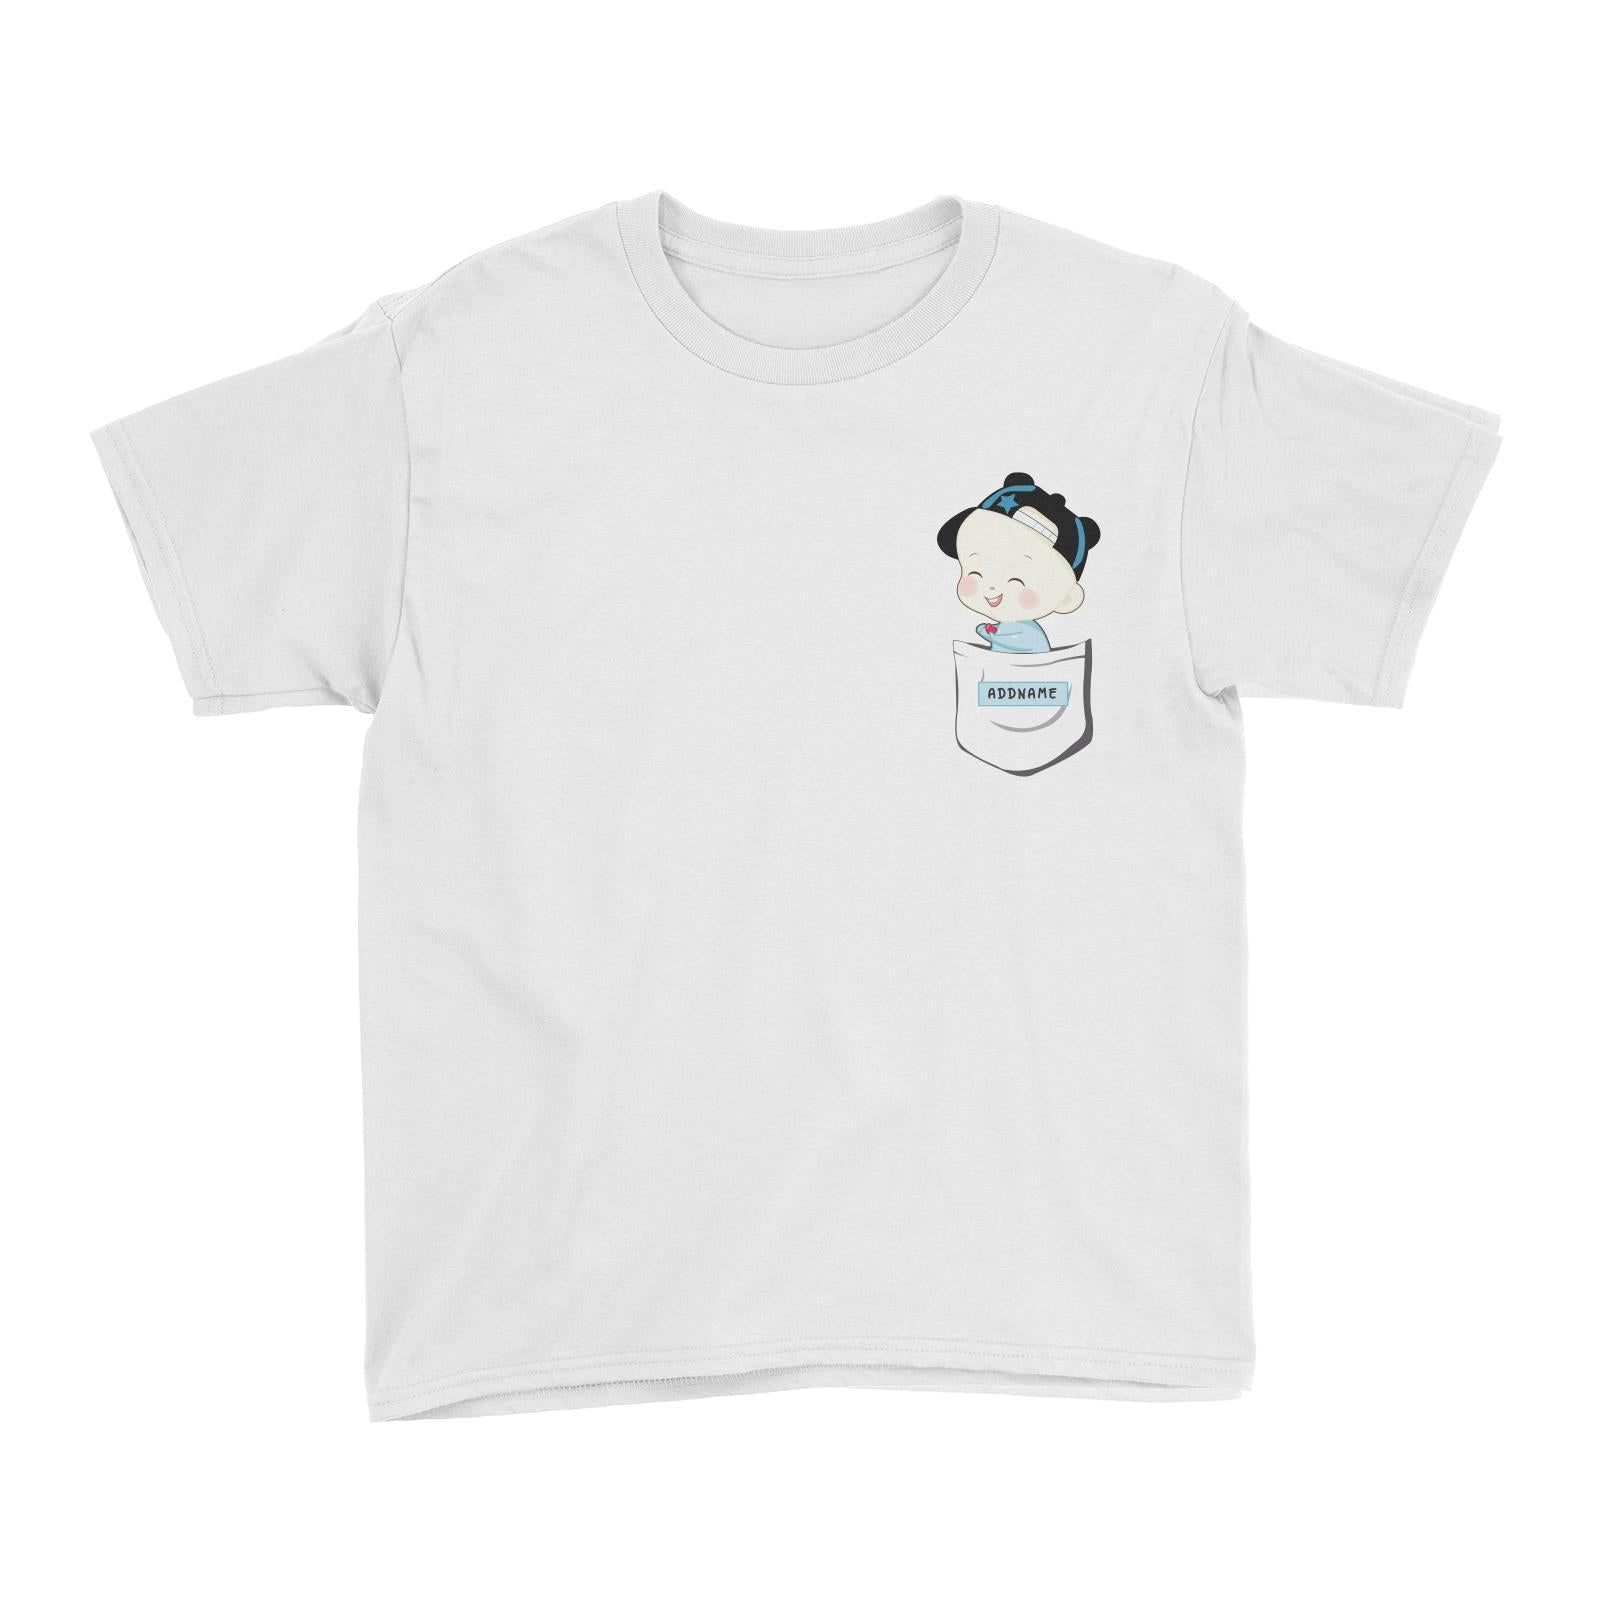 My Lovely Family Series Pocket Size Baby Boy Addname Kid's T-Shirt